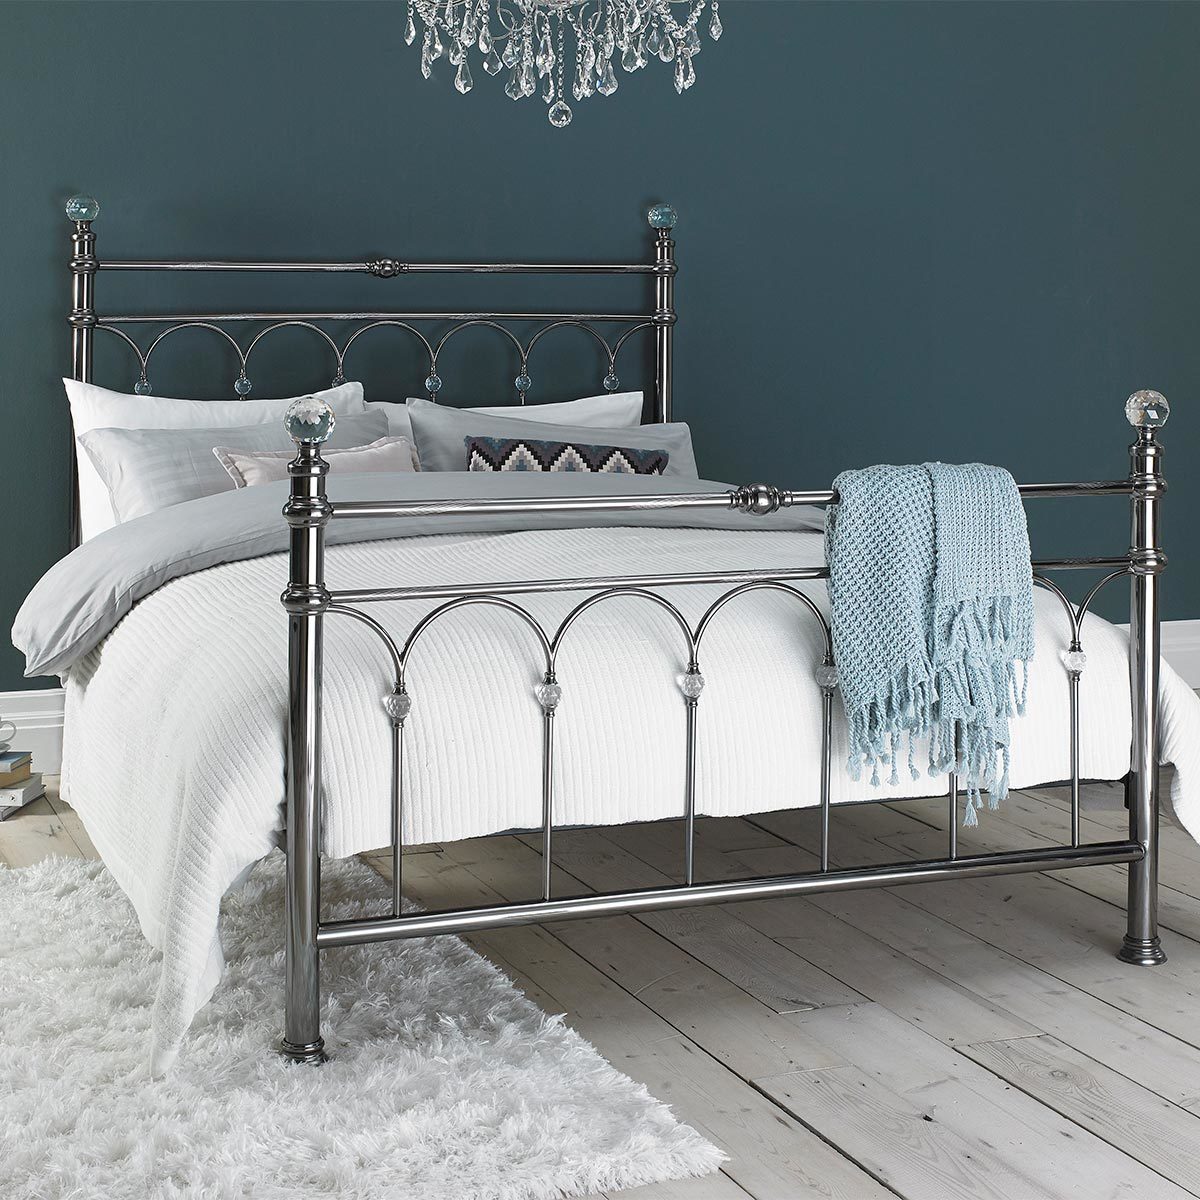 Bentley Cristina Antique Nickel Finish, What Kind Of Metal Are Bed Frames Made Of